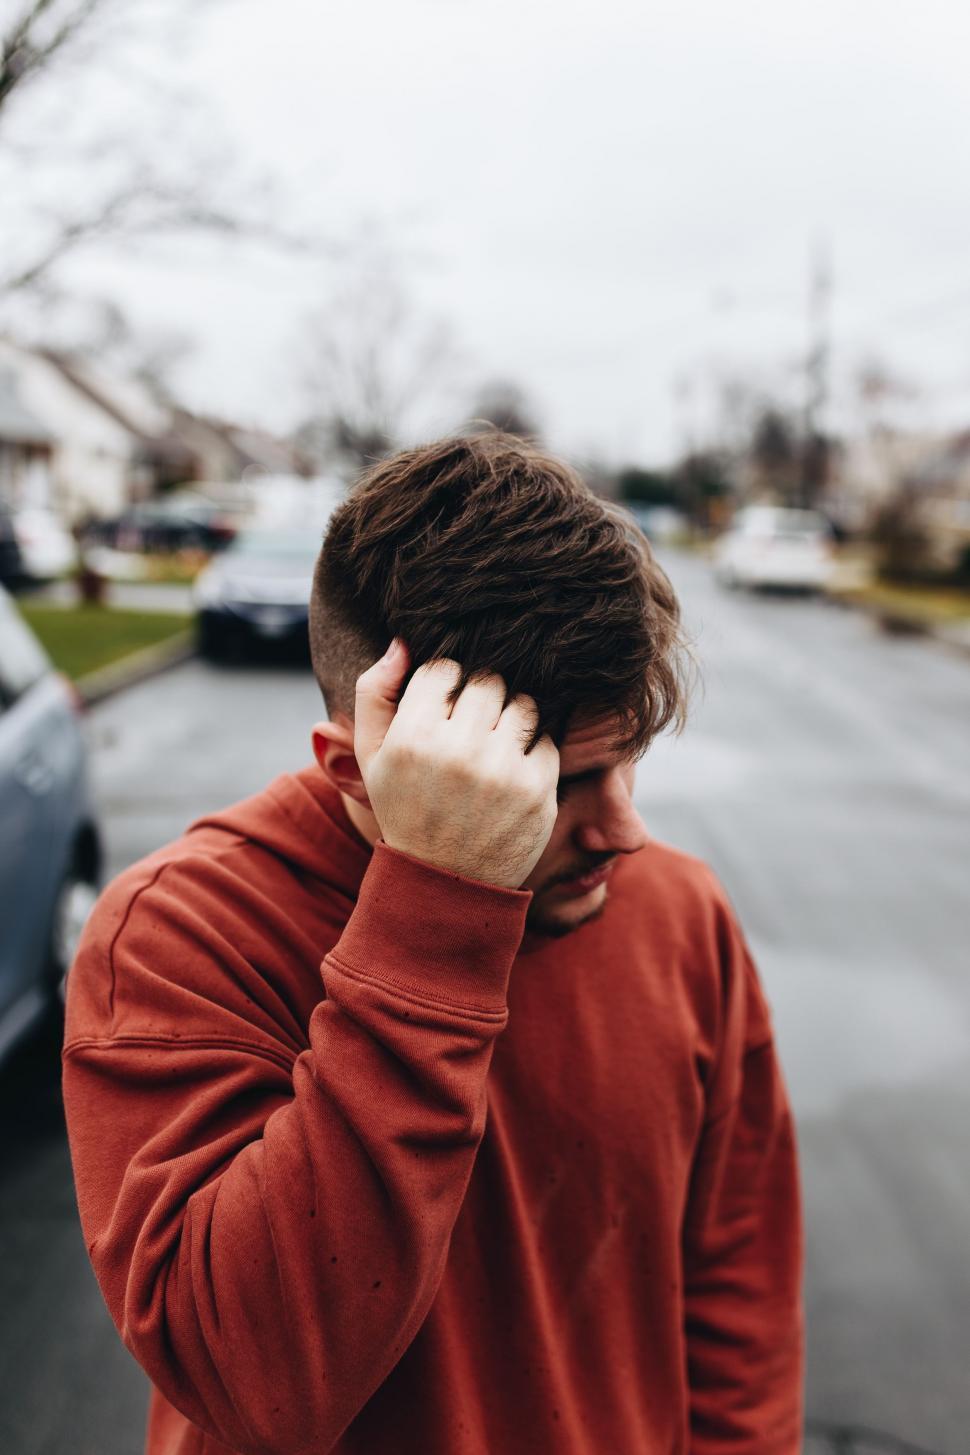 Free Image of Man in Red Sweatshirt Holding Head in Hands 